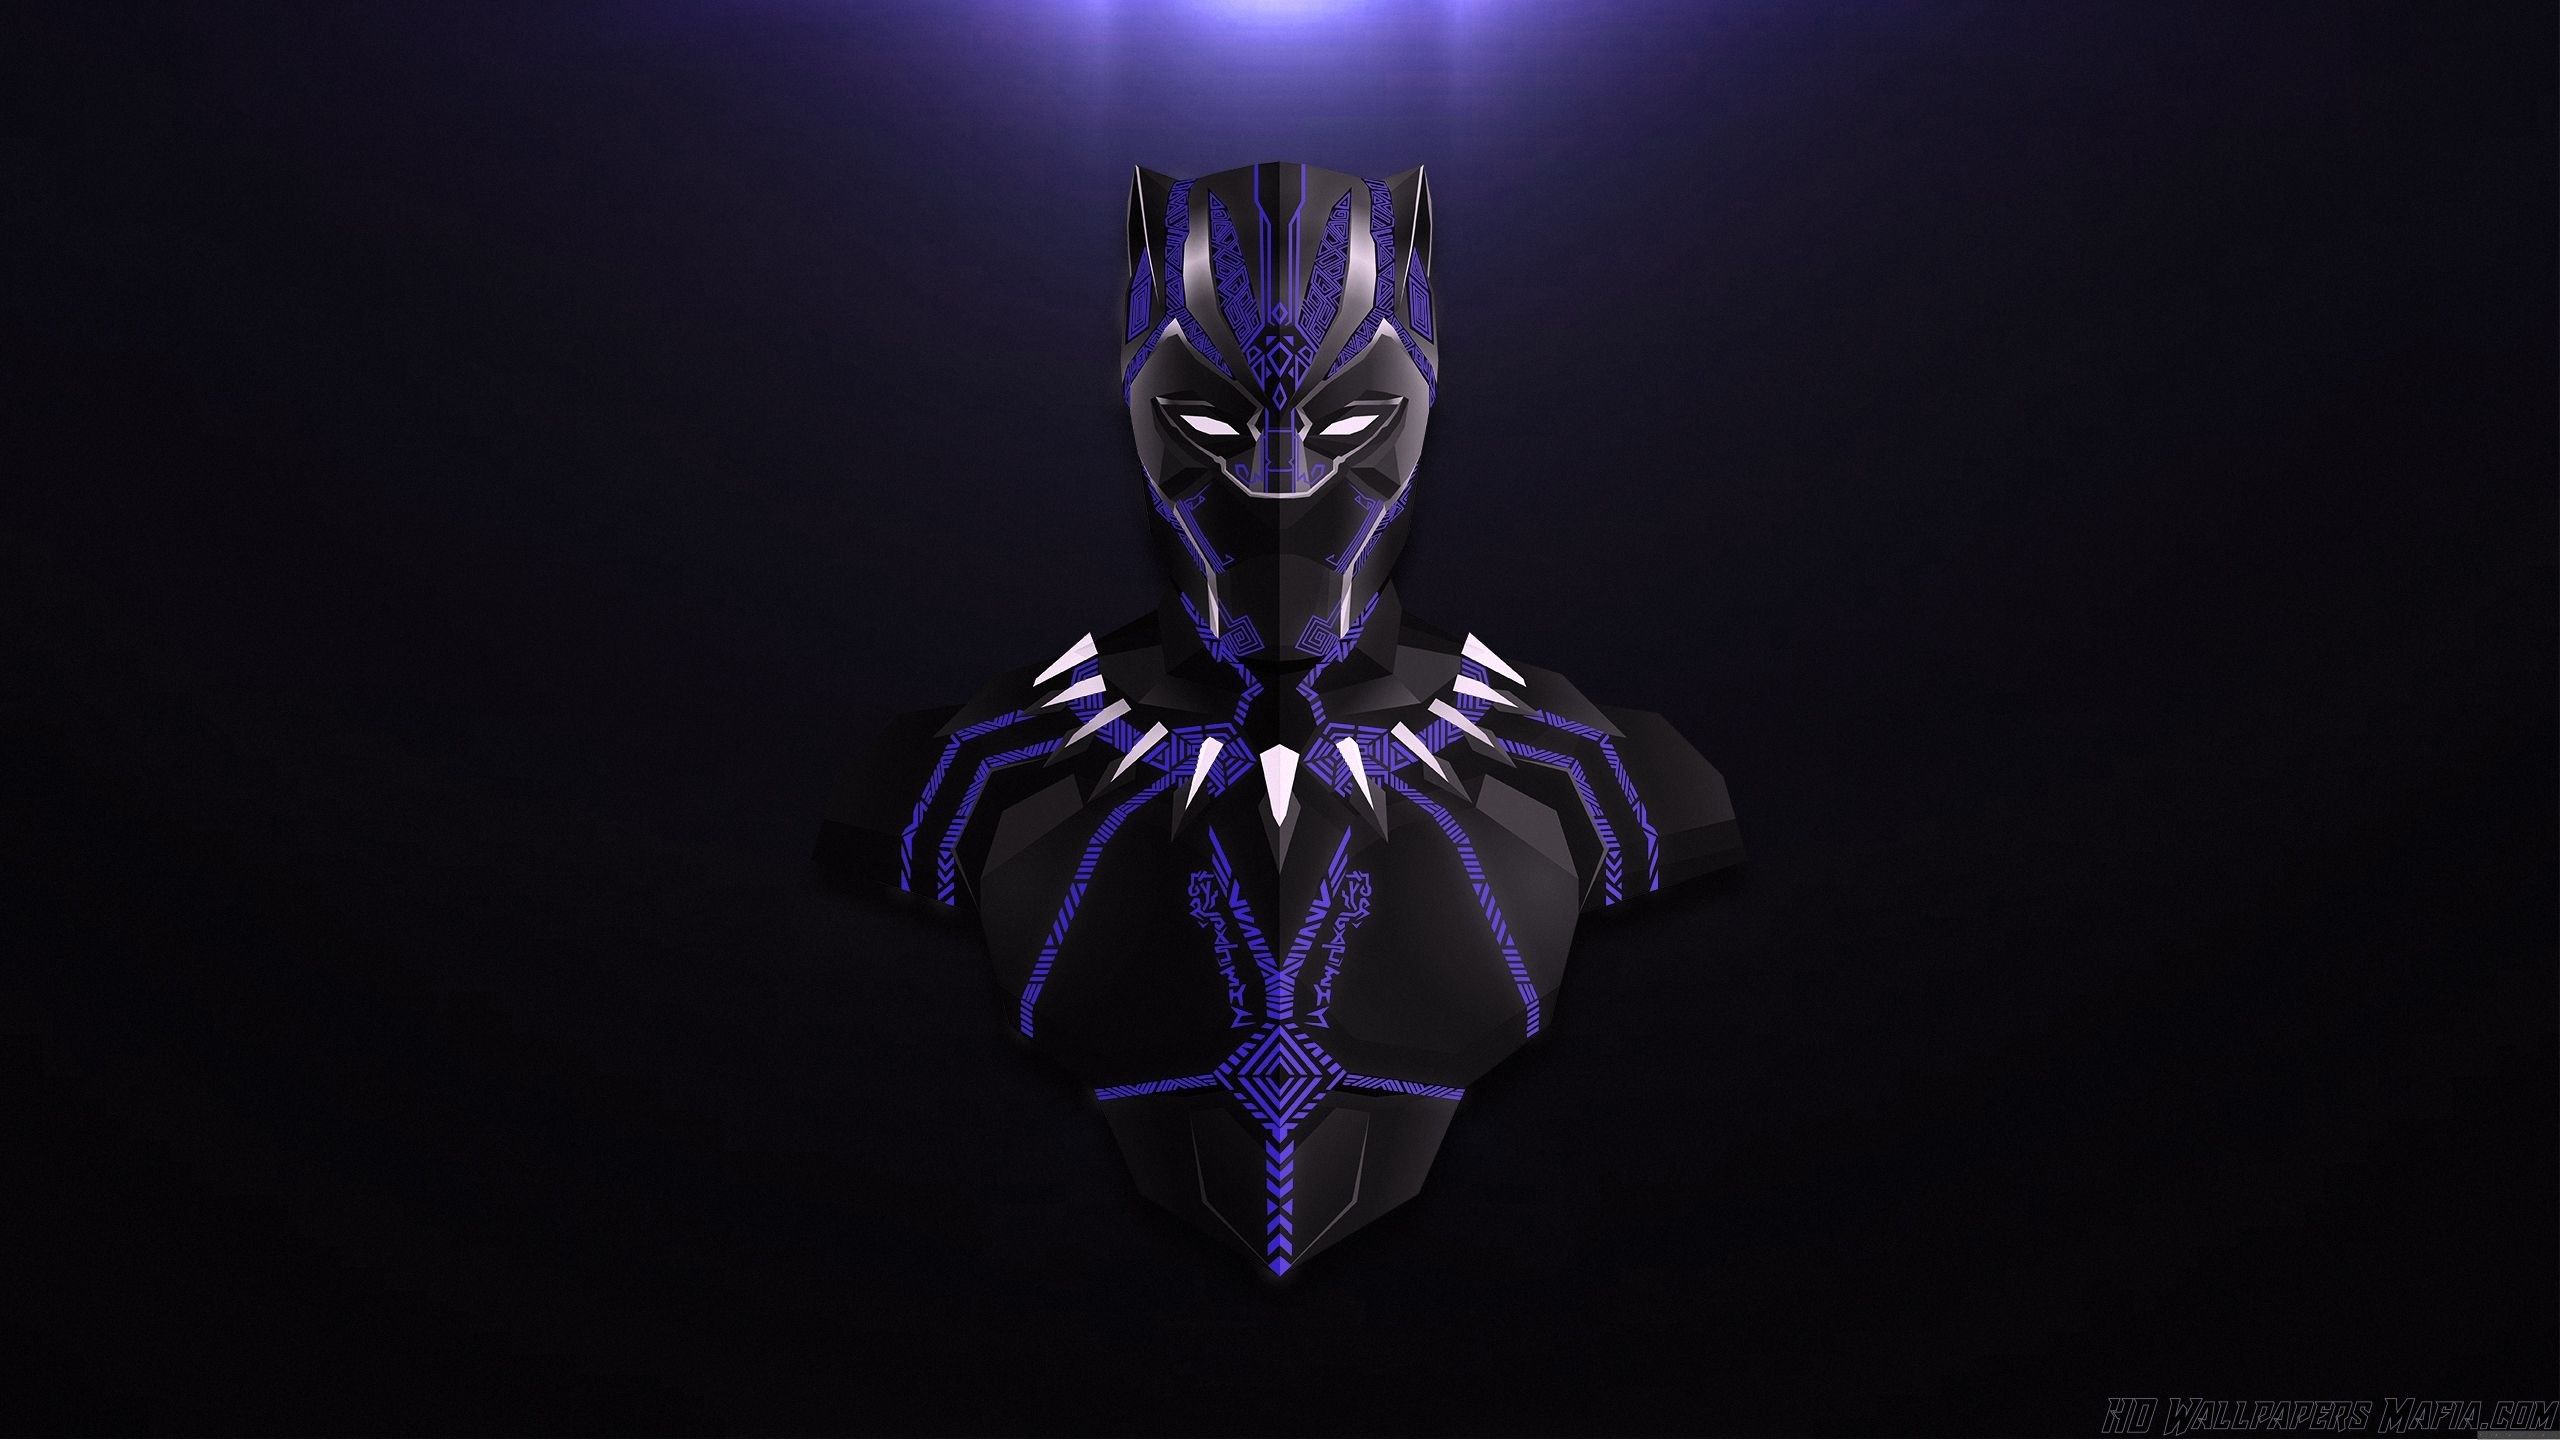 Cool Black Panther Wallpapers - Wallpaper Cave